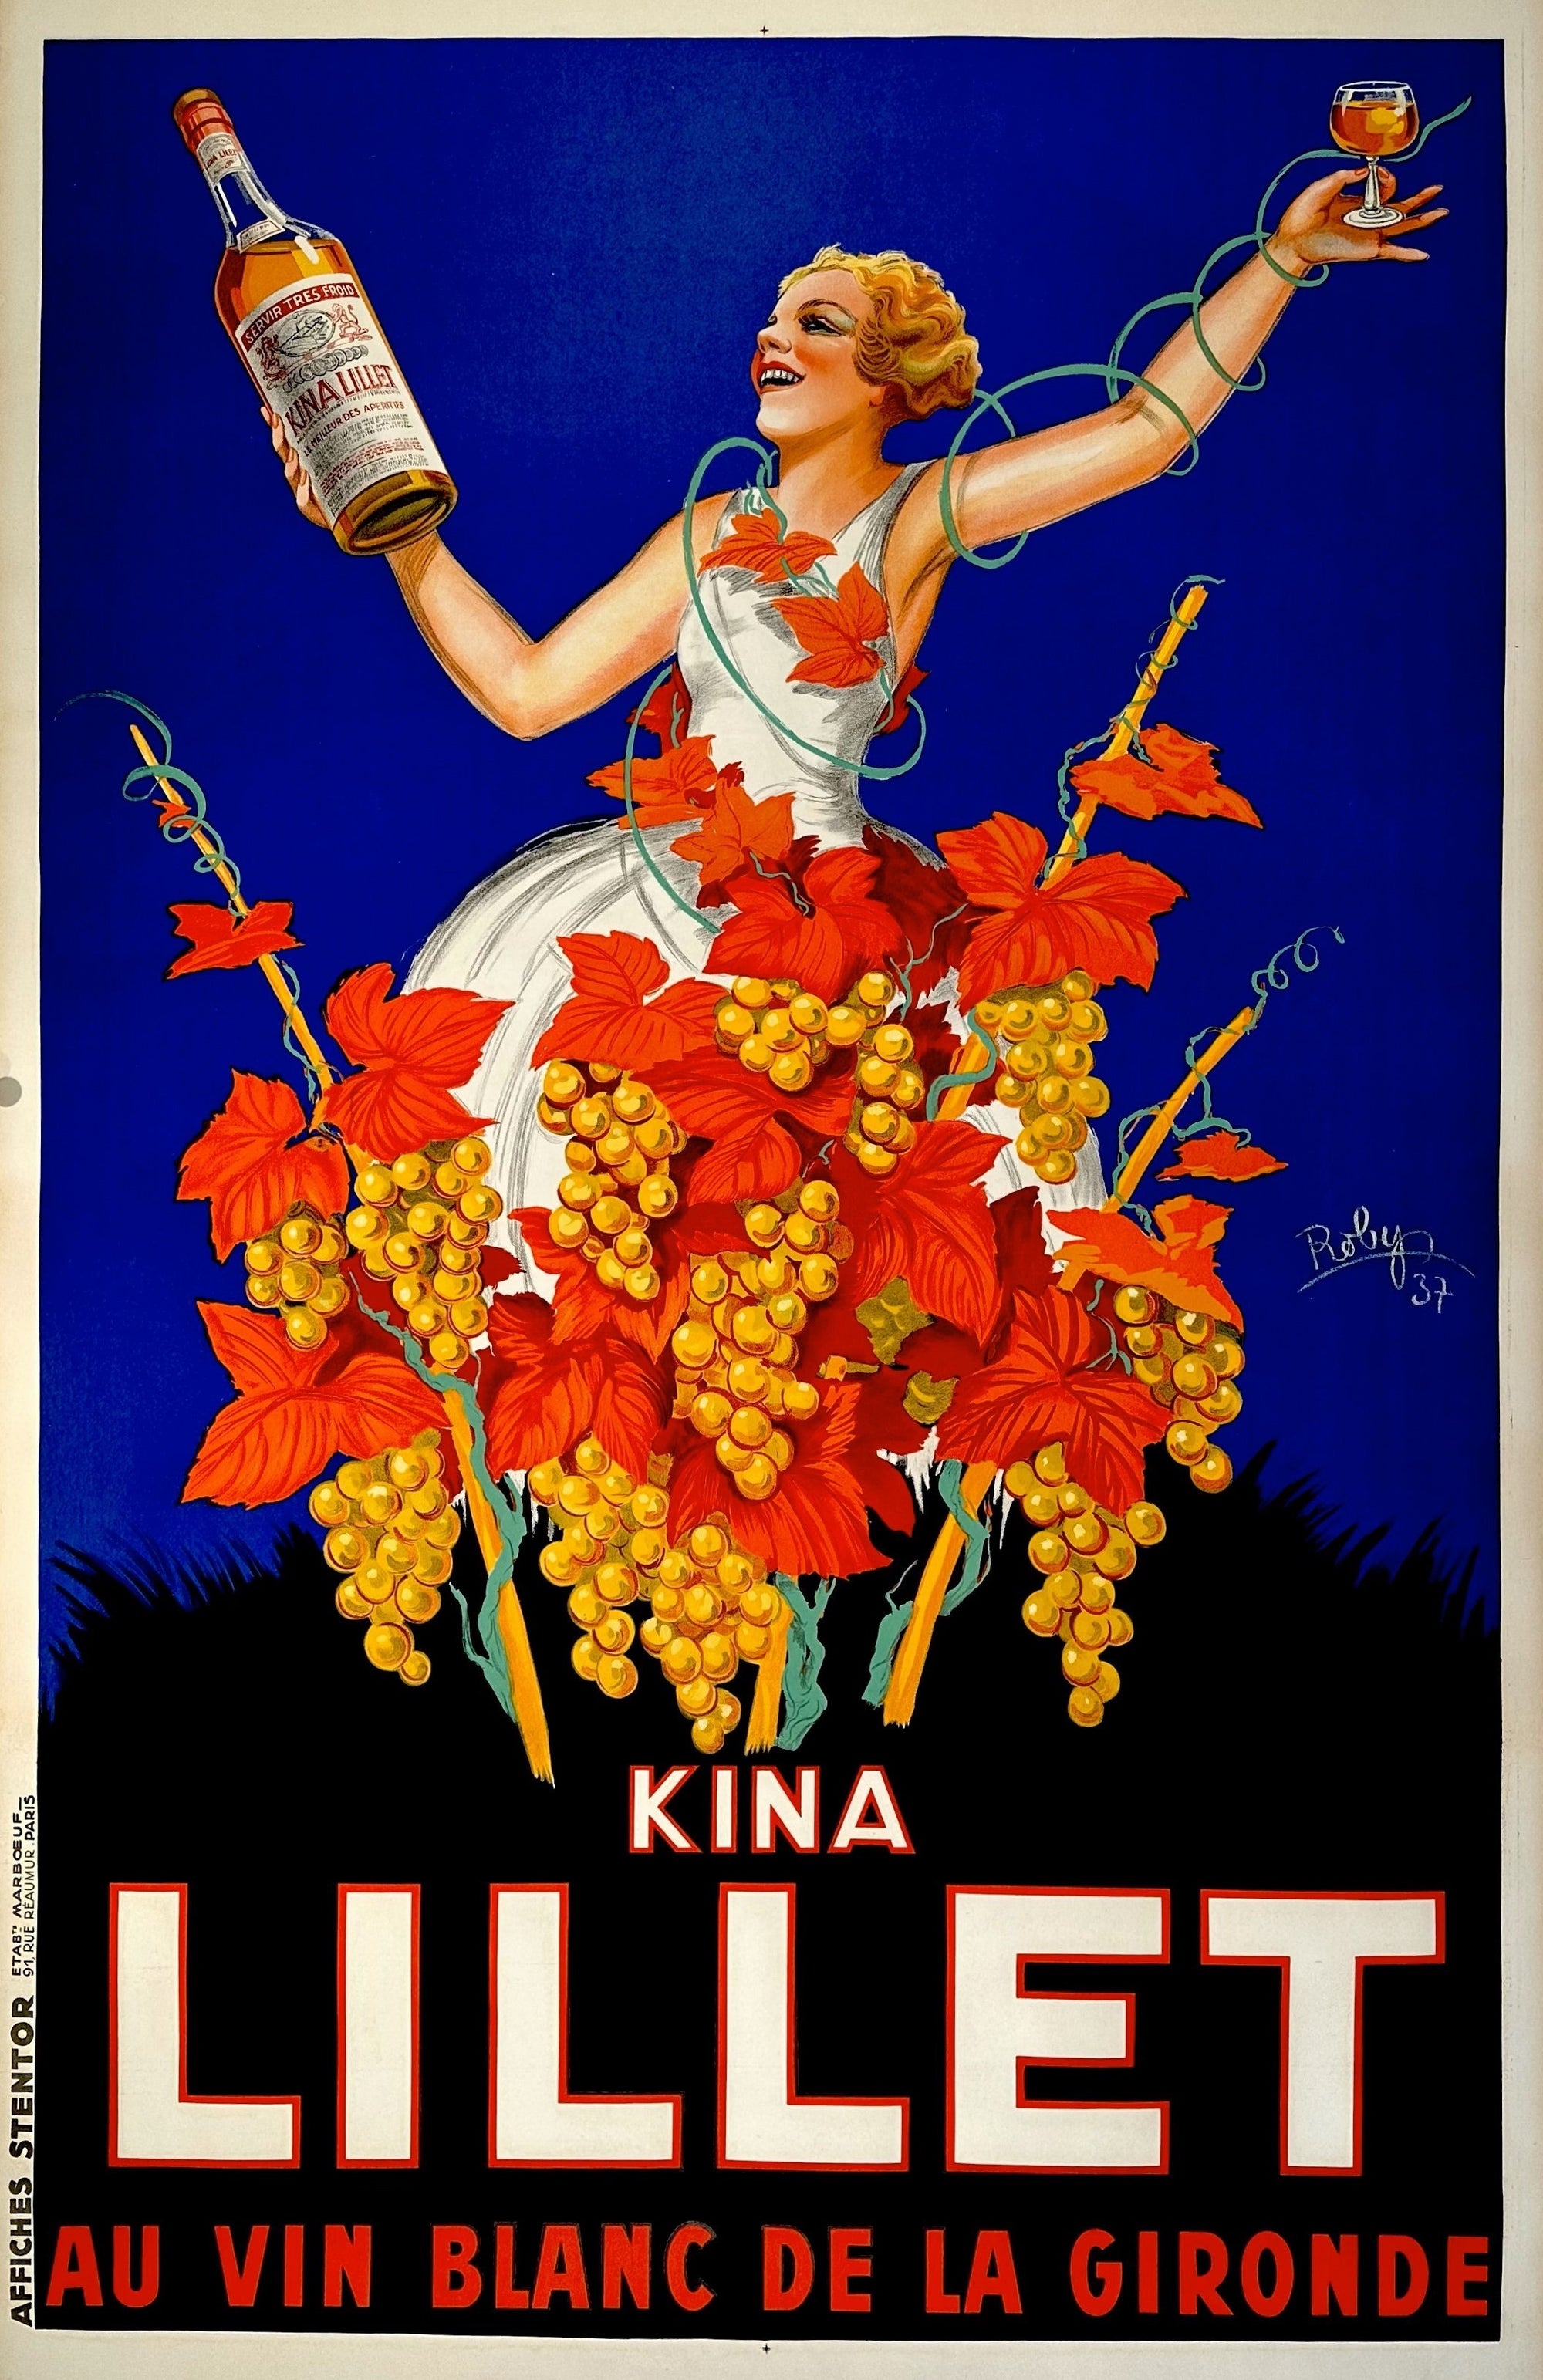 Kina Lillet by Robys - Authentic Vintage Poster